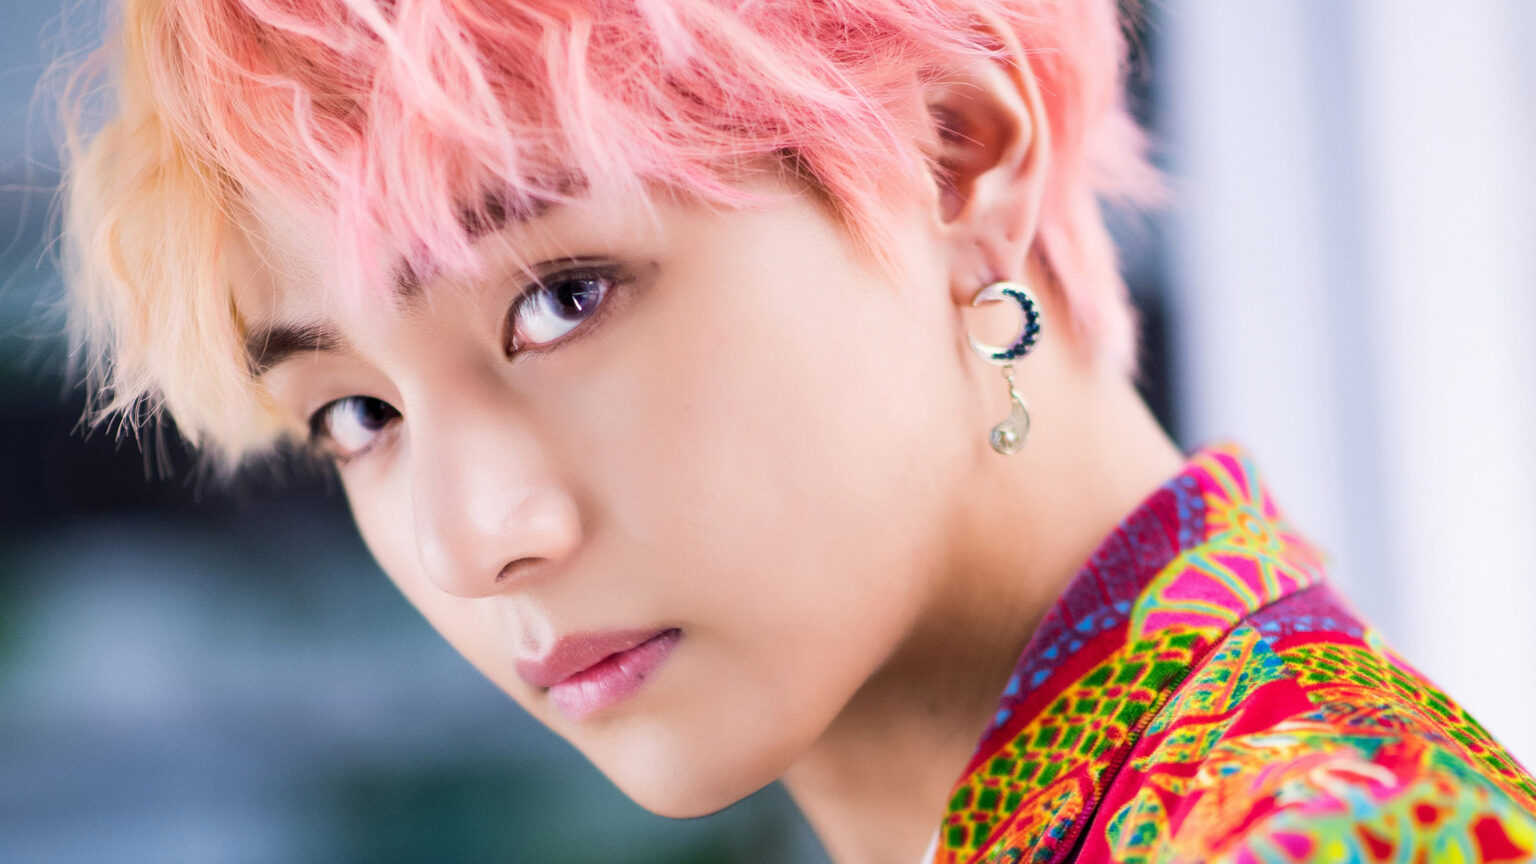 Falling in love with the band BTS? Join the club, Here's everything you could want to know about V including his birthday and more.